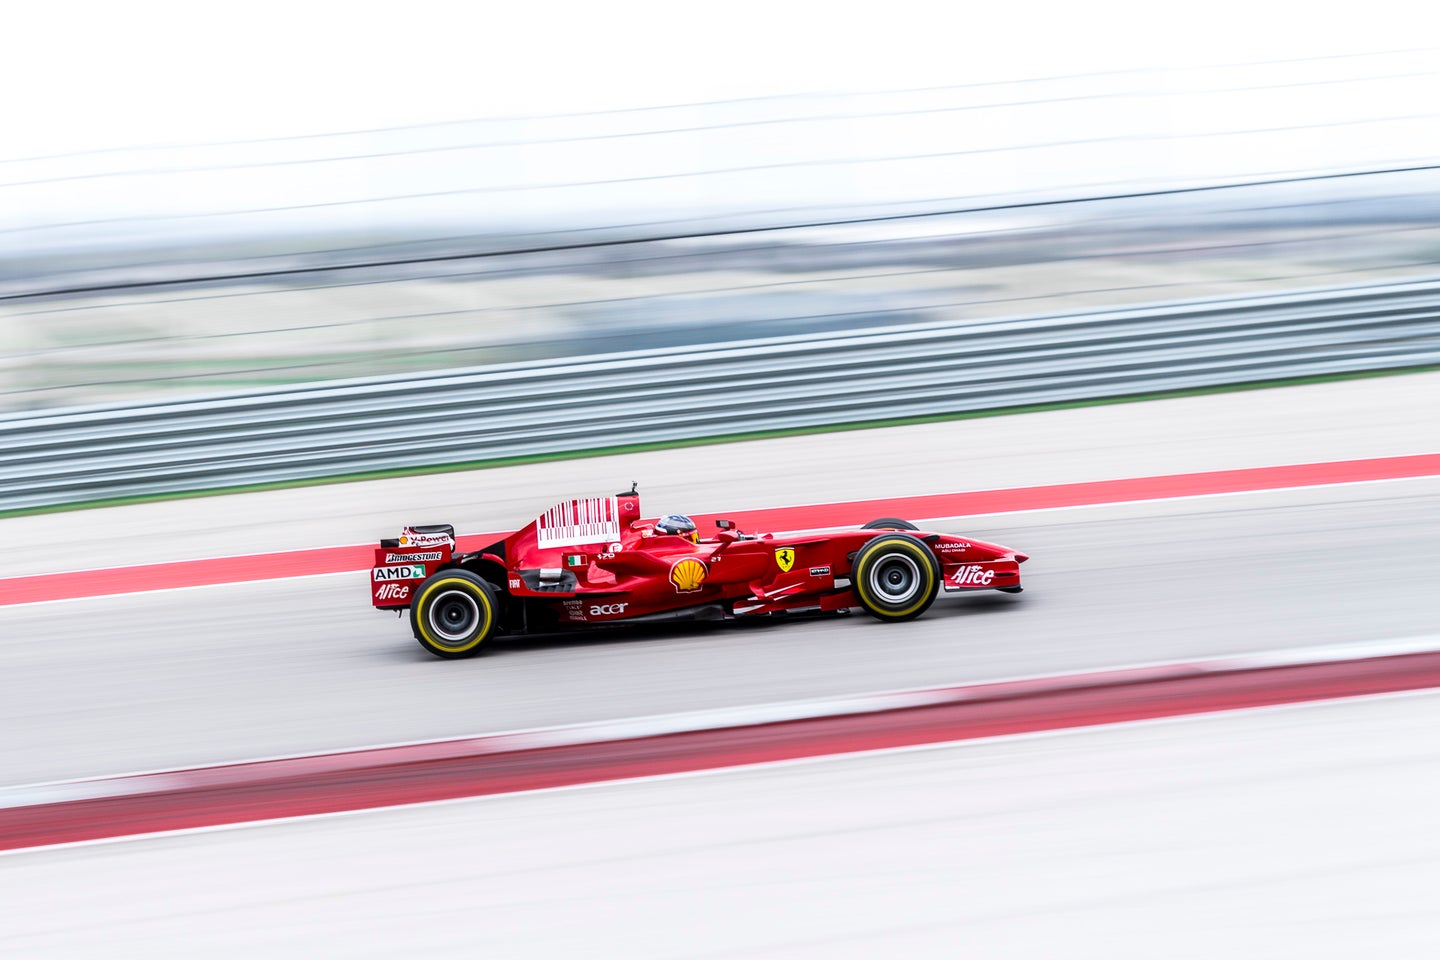 Track/Side: Ferrari Corse Clienti At COTA With Guest Photographer James Stacy